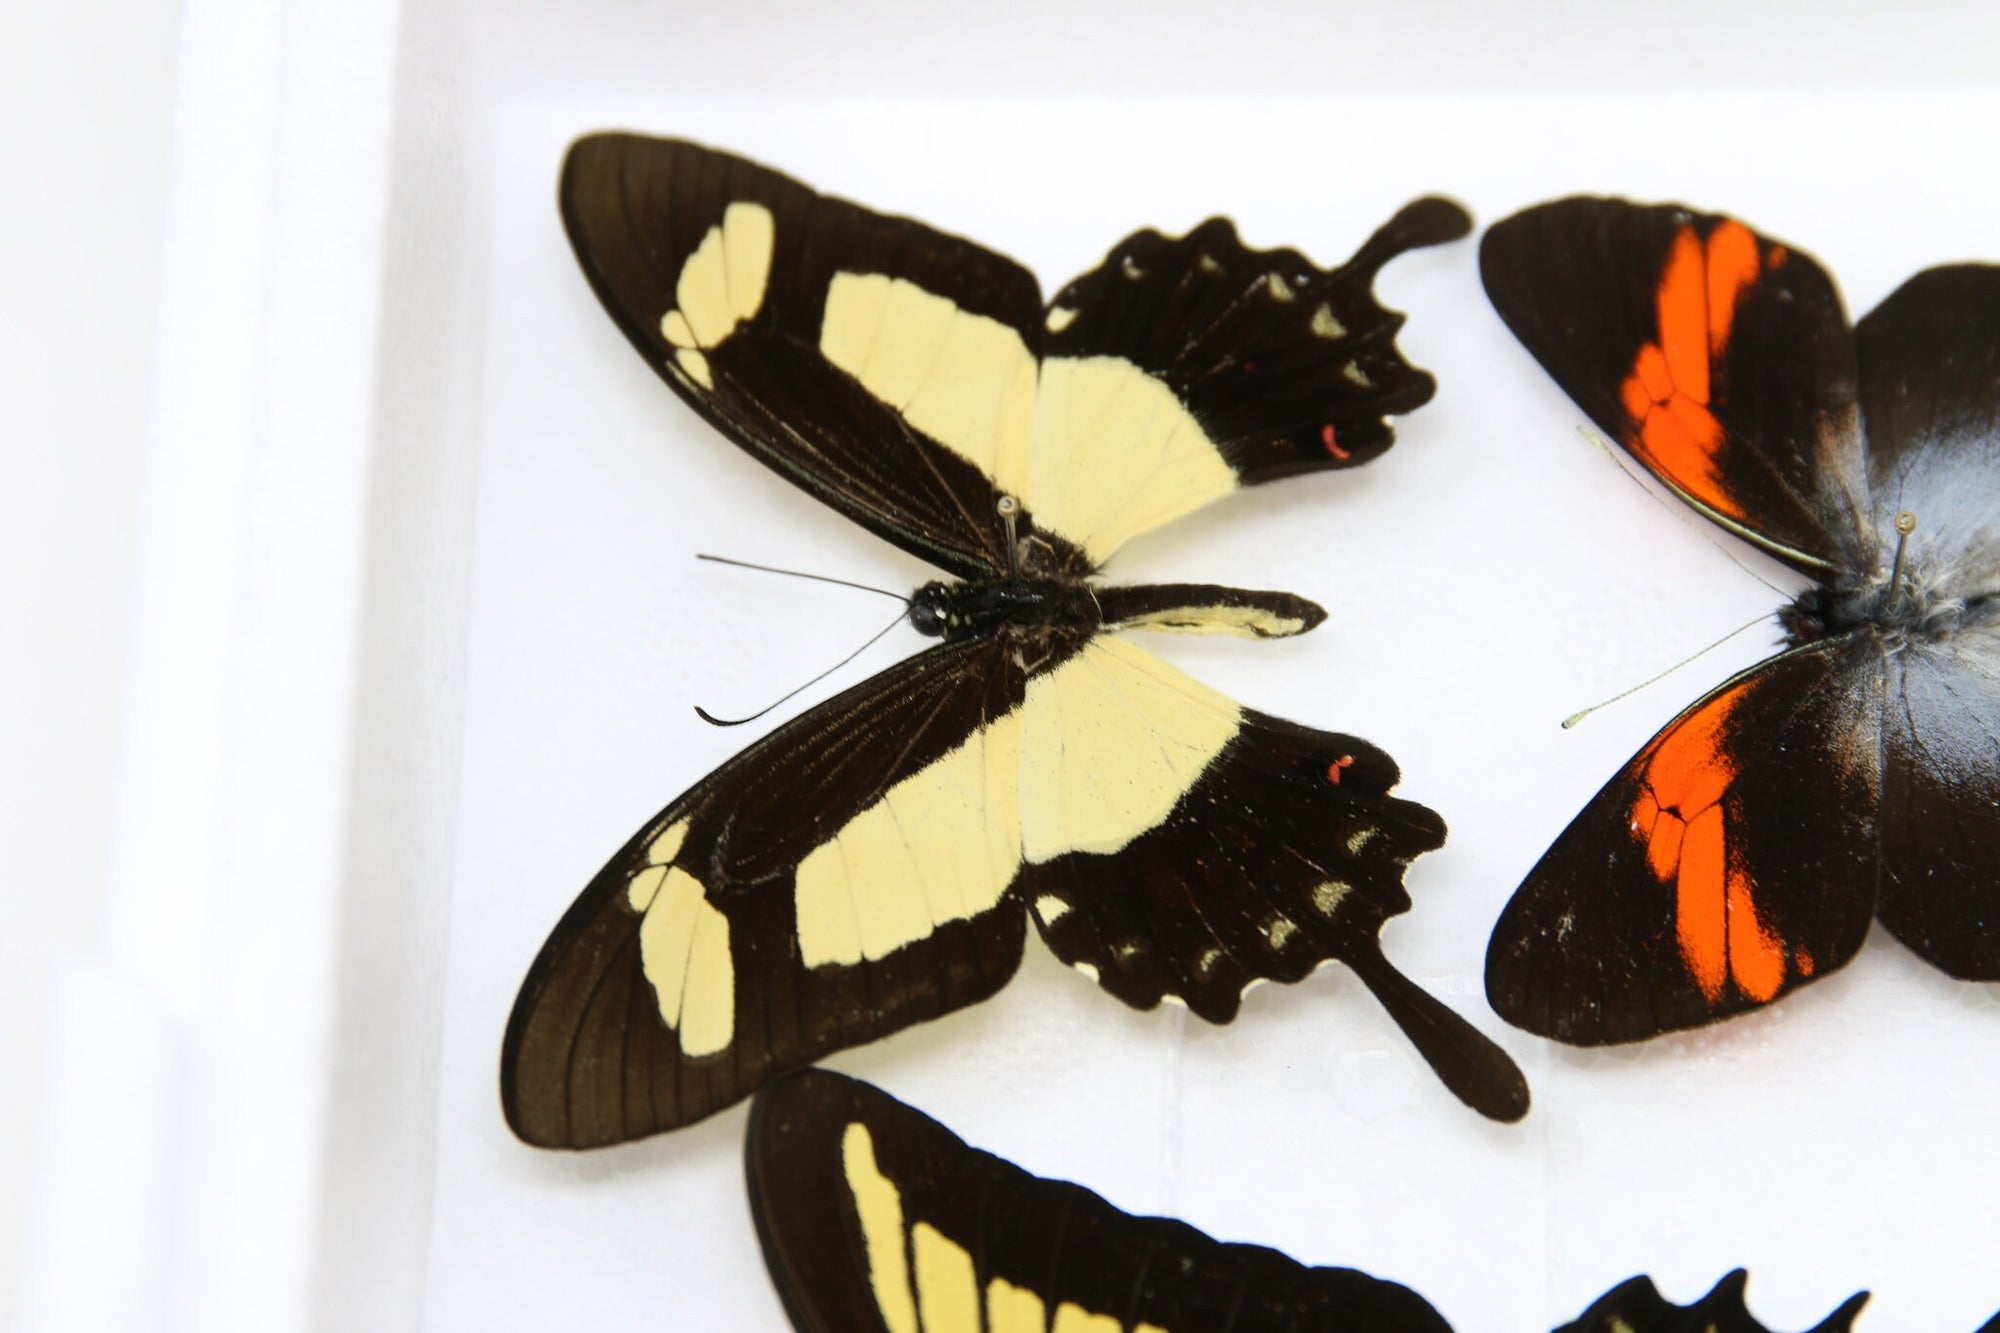 Pinned Tropical Butterflies, A1 Real Butterfly Pinned Set Specimens, Entomology Taxidermy (#BUT82)